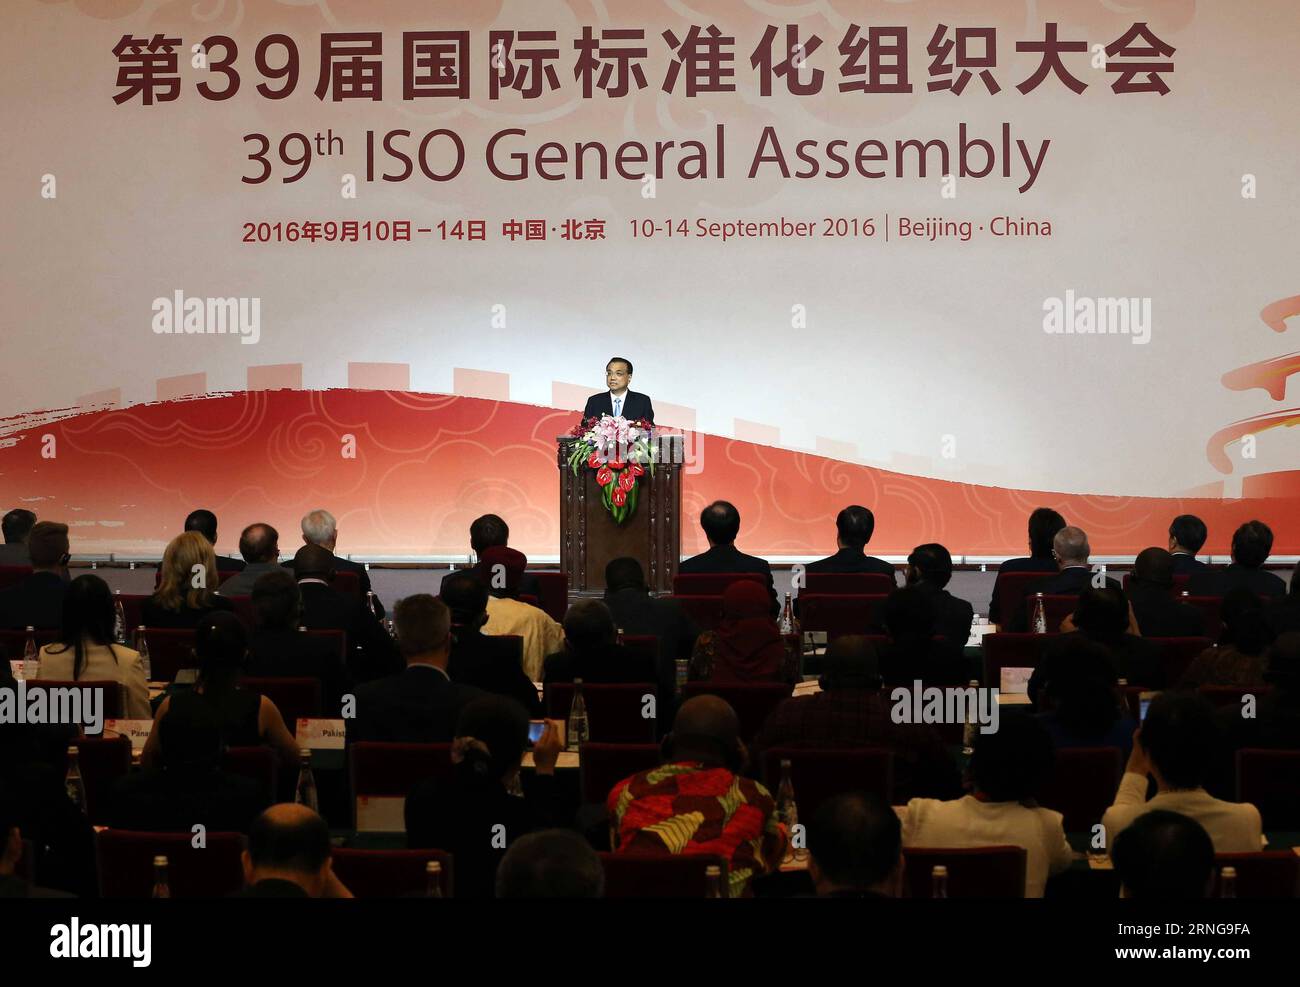 (160914) -- BEIJING, Sept. 14, 2016 -- Chinese Premier Li Keqiang addresses the 39th International Organization for Standardization (ISO) General Assembly in Beijing, capital of China, Sept. 14, 2016. ) (wyo) CHINA-BEIJING-LI KEQIANG-ISO GENERAL ASSEMBLY (CN) LiuxWeibing PUBLICATIONxNOTxINxCHN   160914 Beijing Sept 14 2016 Chinese Premier left Keqiang addresses The 39th International Organization for Standardization ISO General Assembly in Beijing Capital of China Sept 14 2016 wyo China Beijing left Keqiang ISO General Assembly CN LiuxWeibing PUBLICATIONxNOTxINxCHN Stock Photo